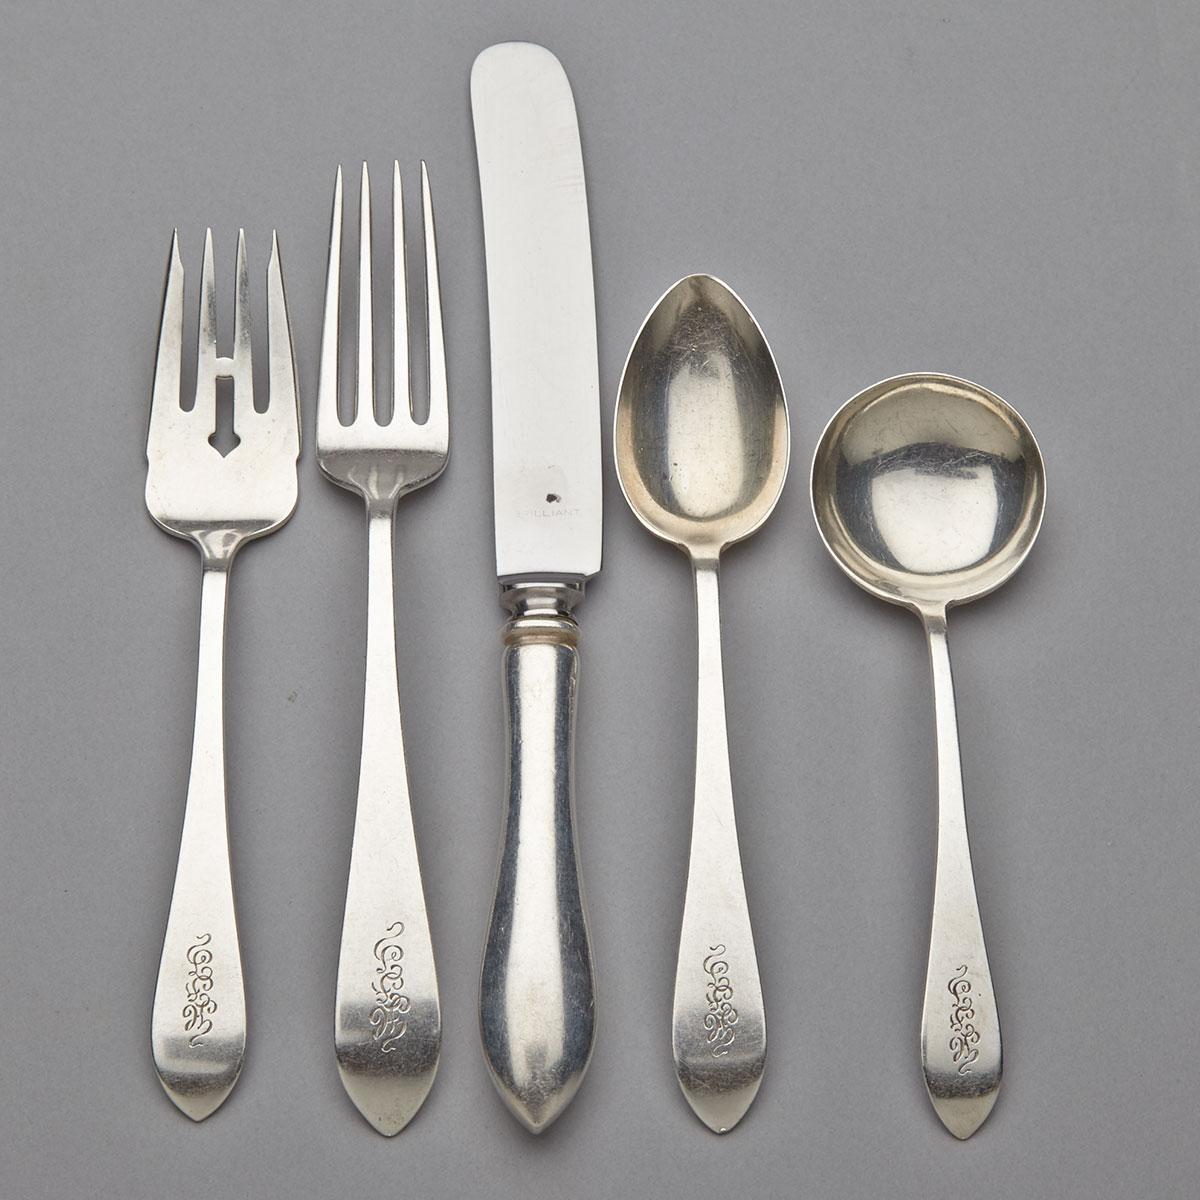 American Silver ‘Pointed Antique’ Pattern Flatware, Dominick & Haff, New York, N.Y., early 20th century